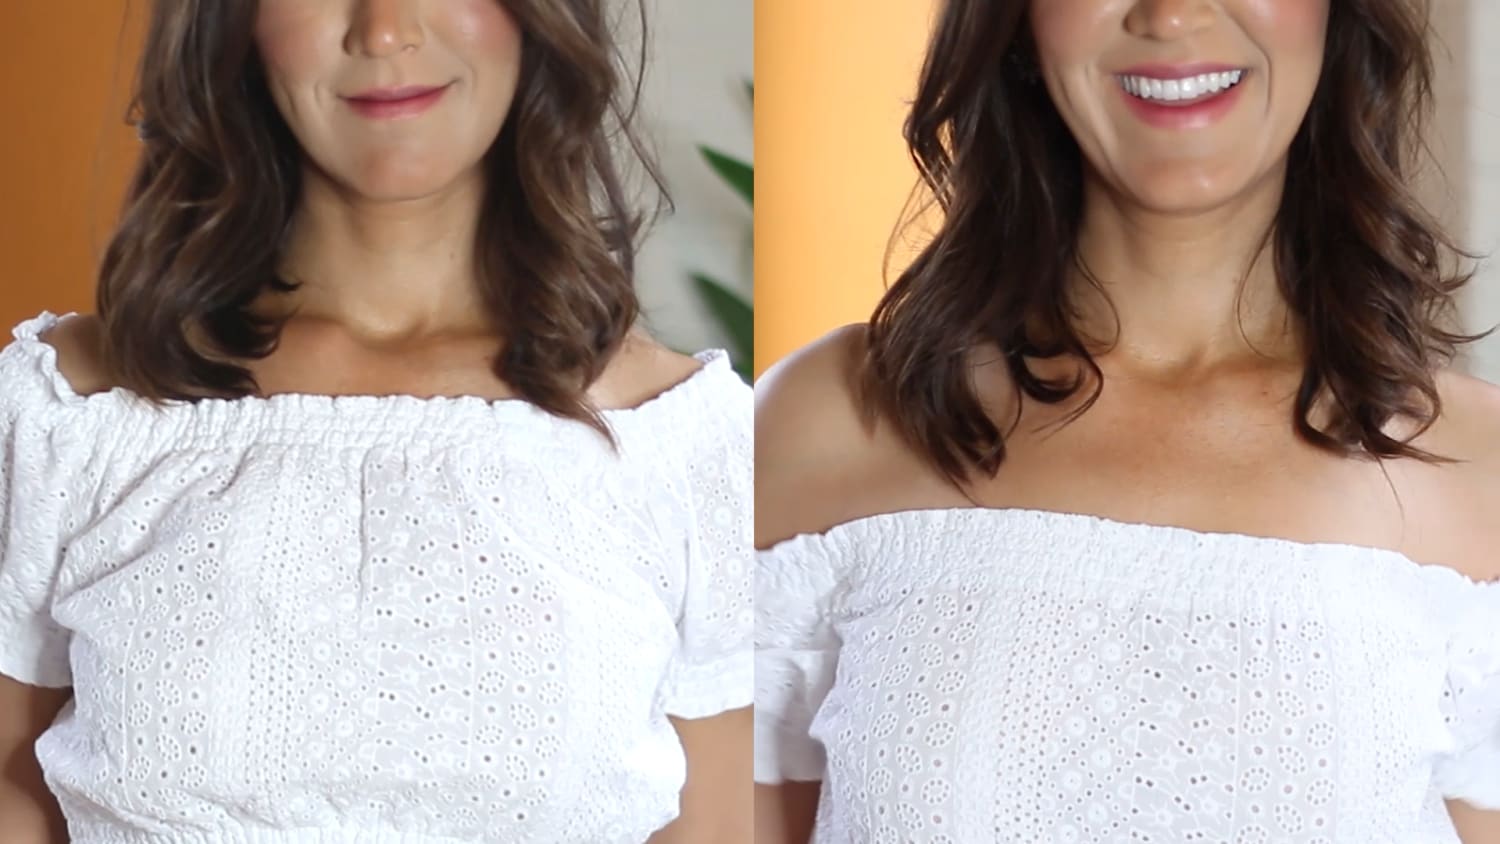 How To Make Off The Shoulder Tops Stay